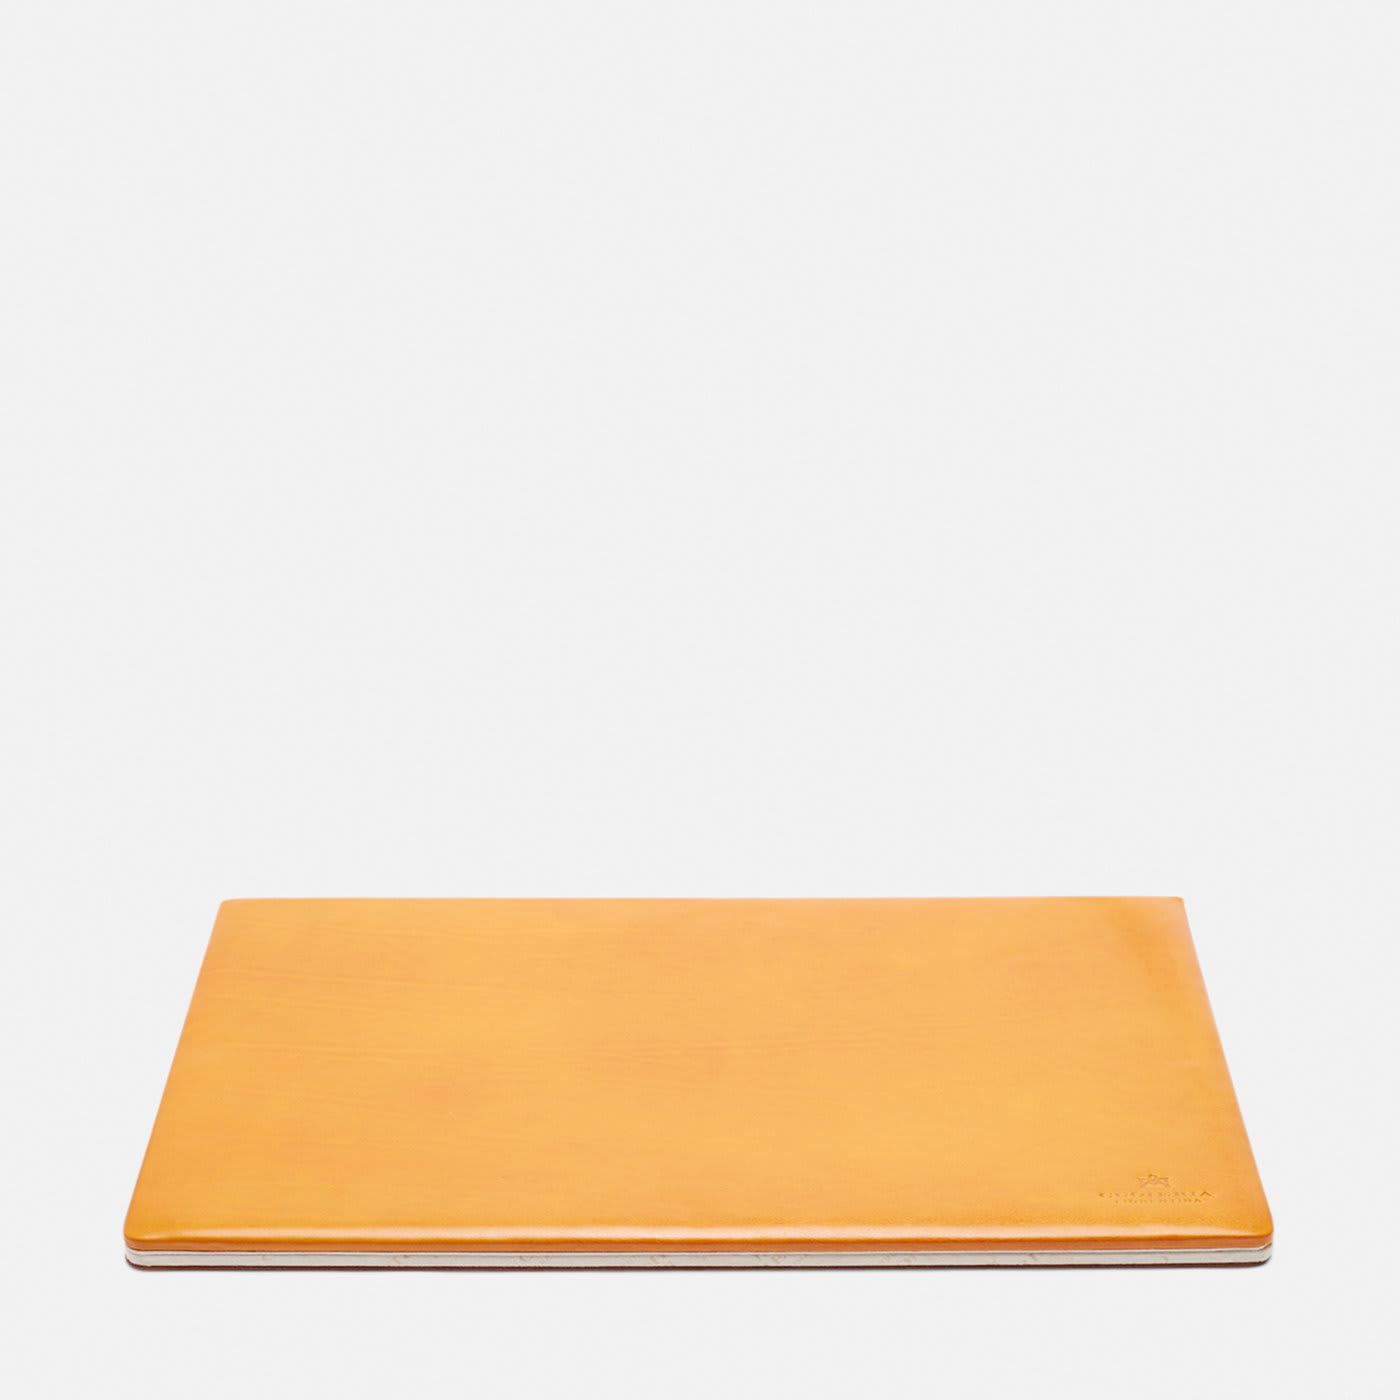 Warm & Color Yellow Set of Desk Pad, Pen and Letter Holder - Cuoieria Fiorentina